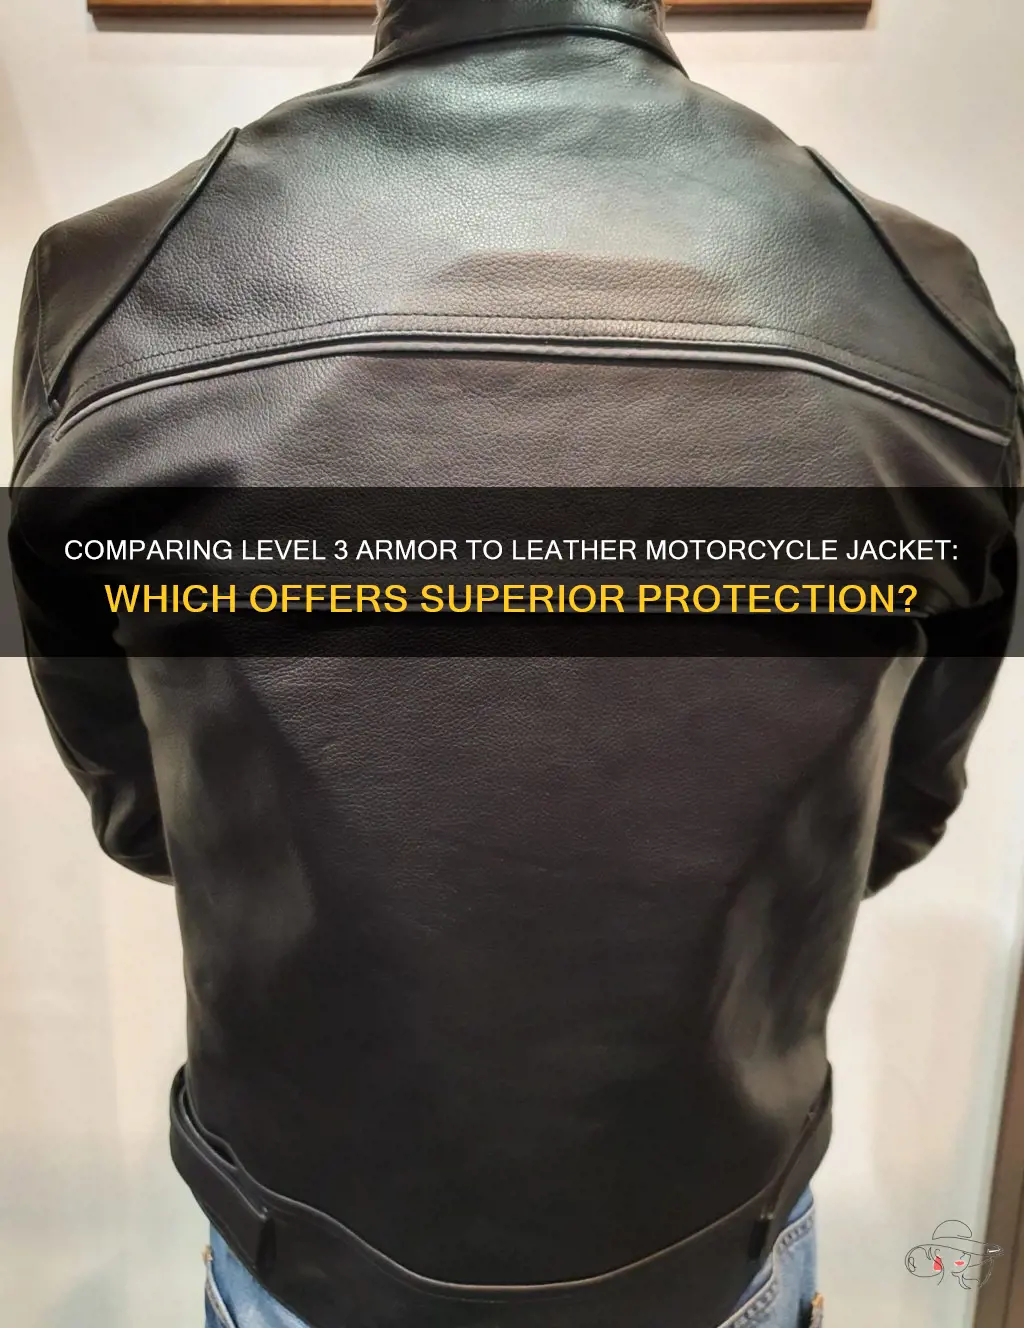 Comparing Level 3 Armor To Leather Motorcycle Jacket: Which Offers ...